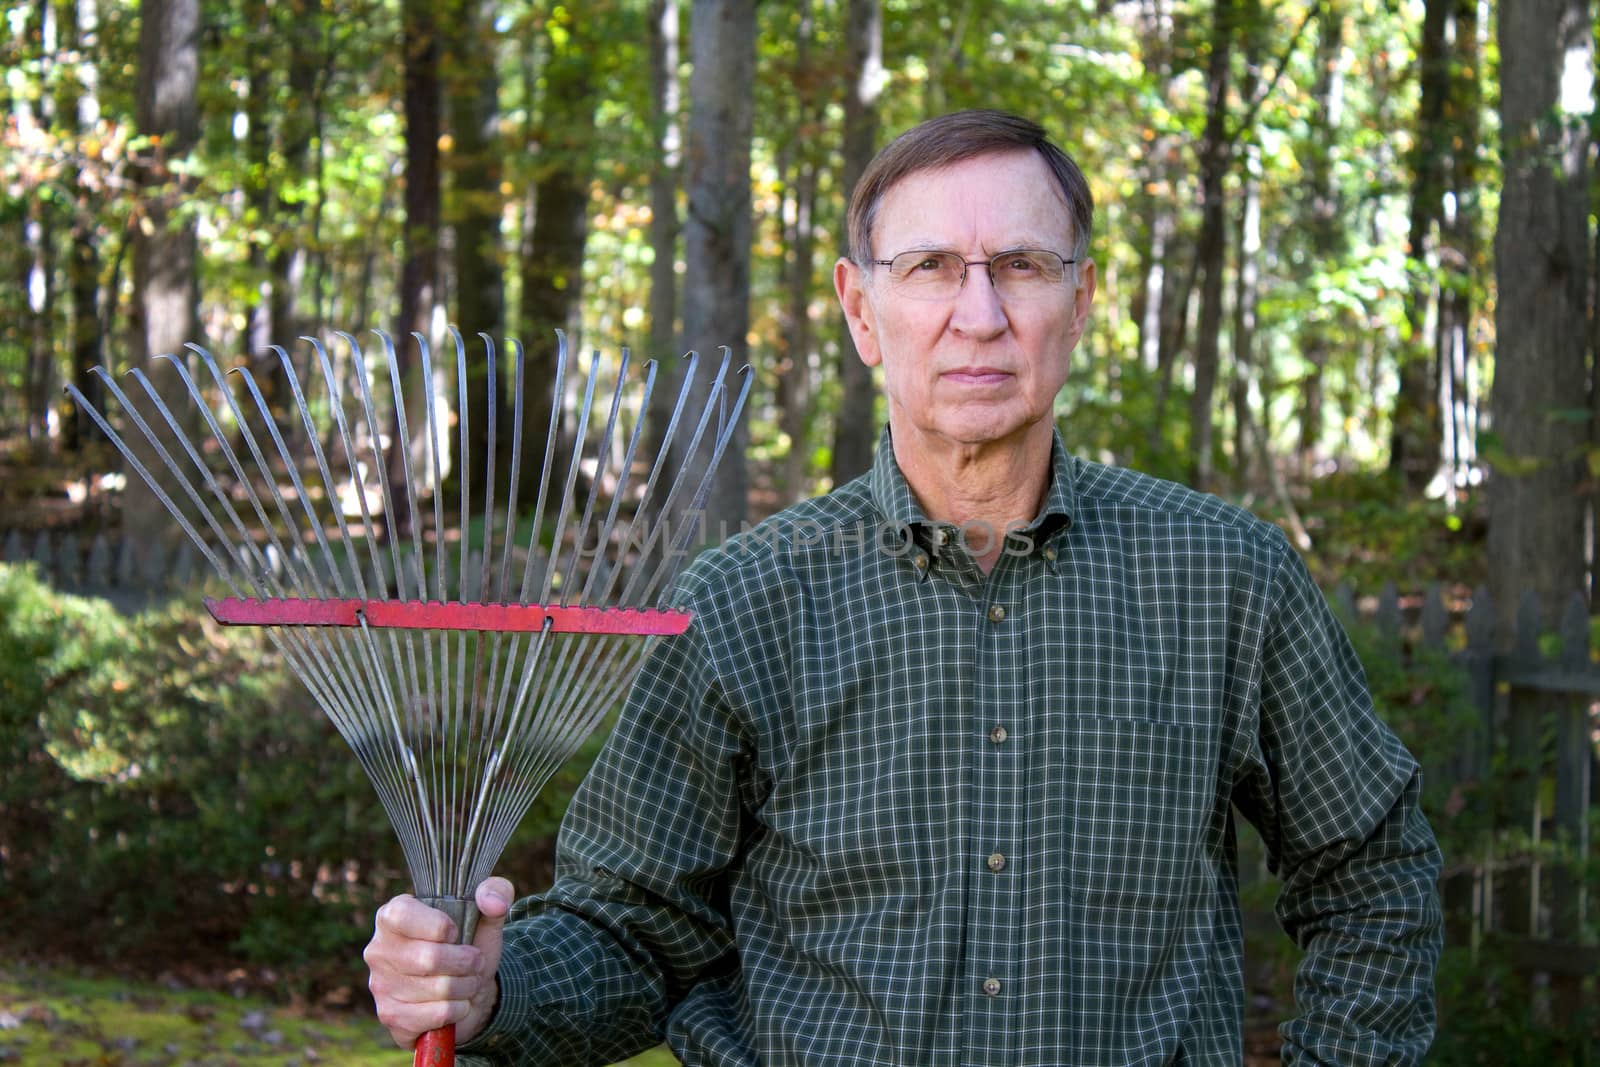 Senior retiree man stands in his backyard holding an old leaf rake with a serious look.